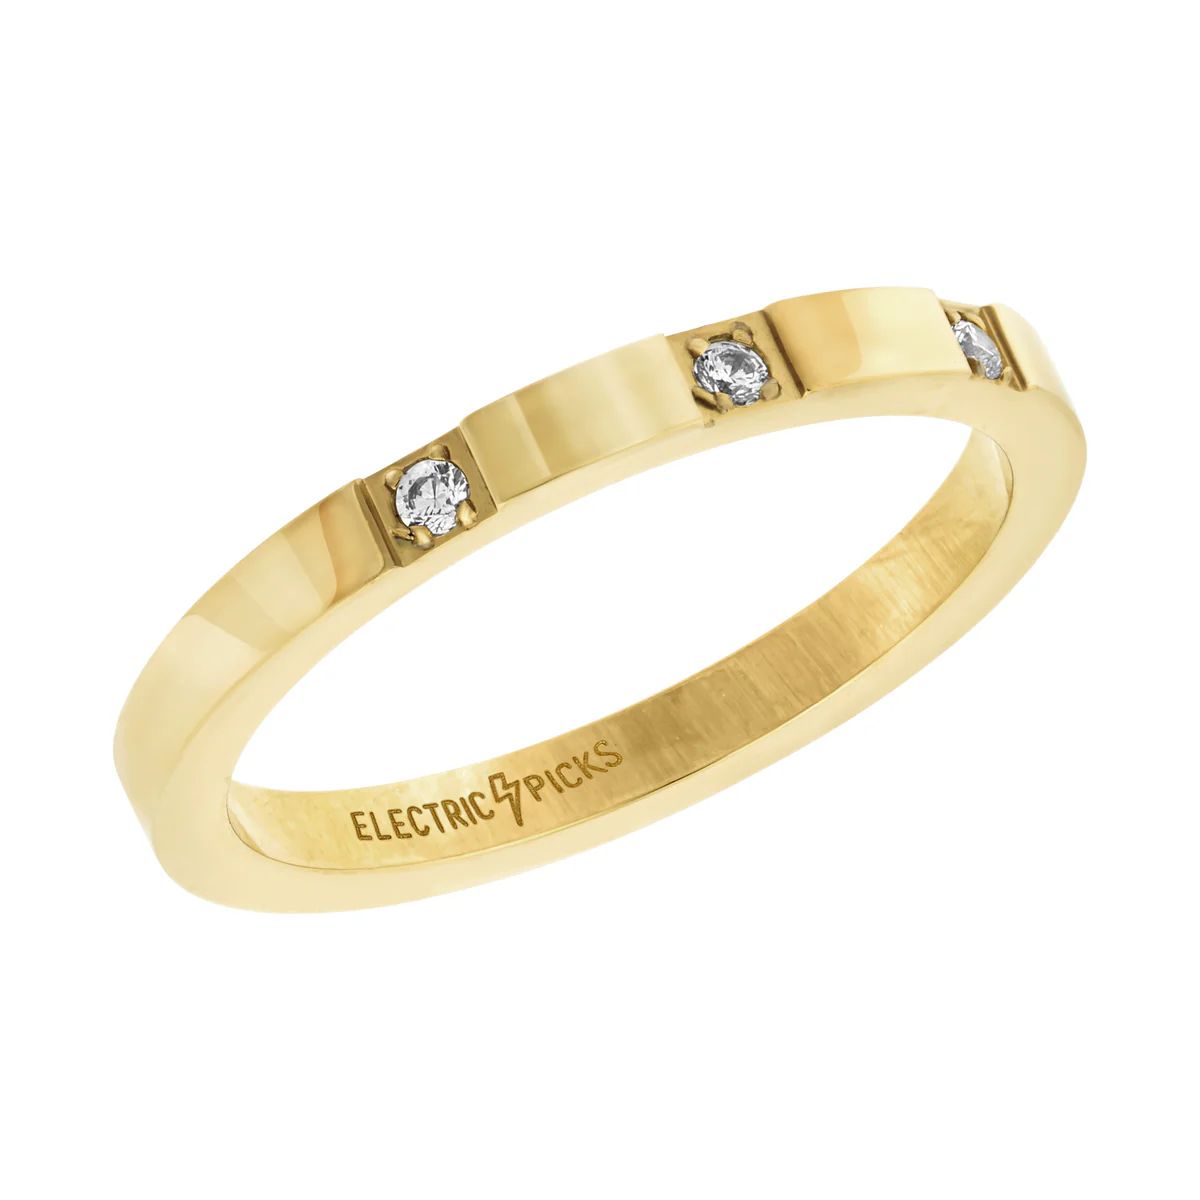 Lily Ring | Electric Picks Jewelry